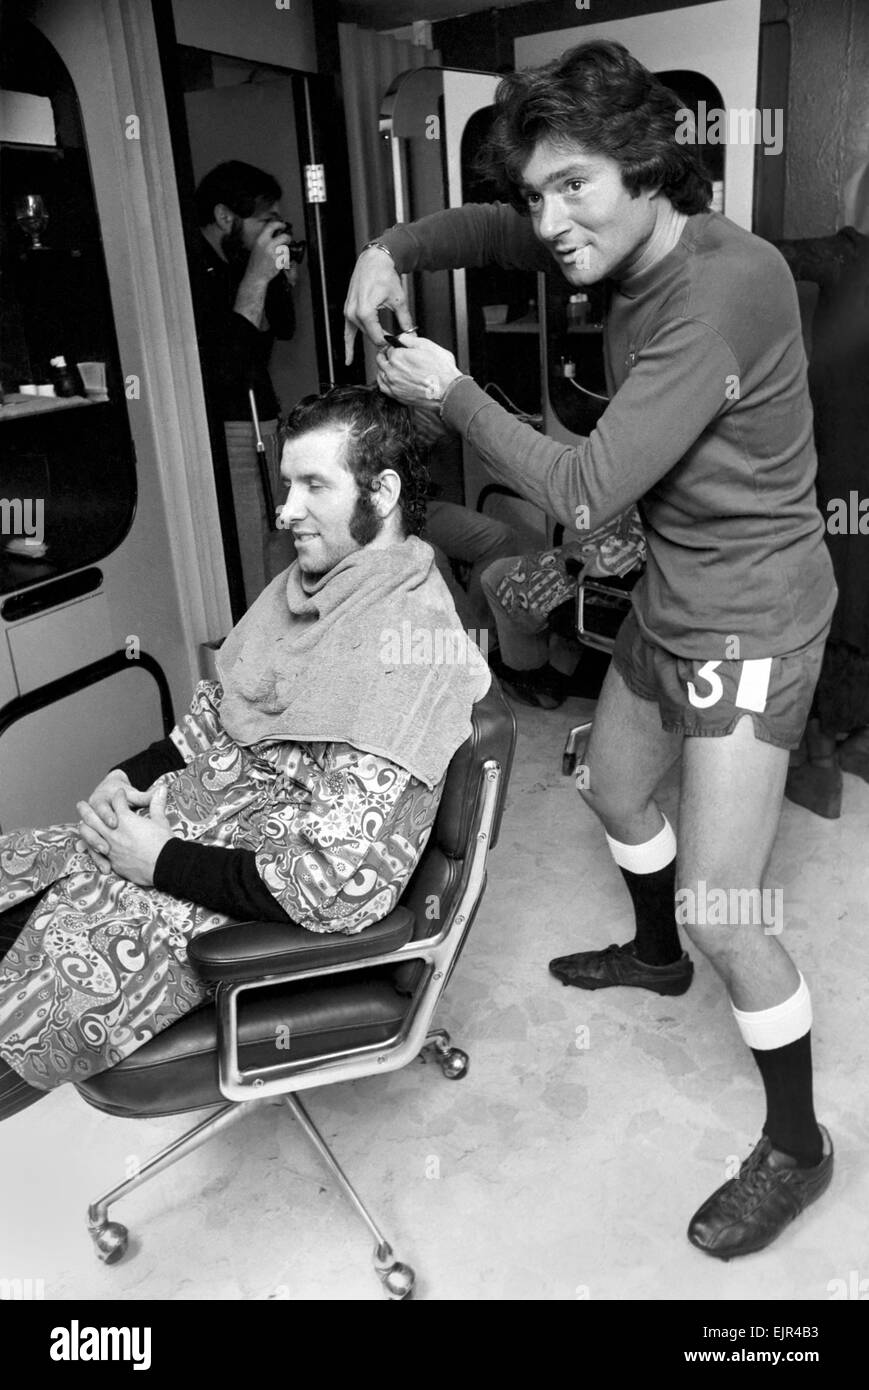 Football fan Vidal Sassoon made a solemn promise that if Chelsea reached the final of the Football League Cup the players and their wives would all get a free hair-do for the occasion. Chelsea are in the Final and Vidal kept this promise. Vidal Sassoon's dressed in Chelsea's Football strip and seen cutting the hair of England and Chelsea's Centre Forward Peter Osgood. March 1972 72-2010-001 Stock Photo